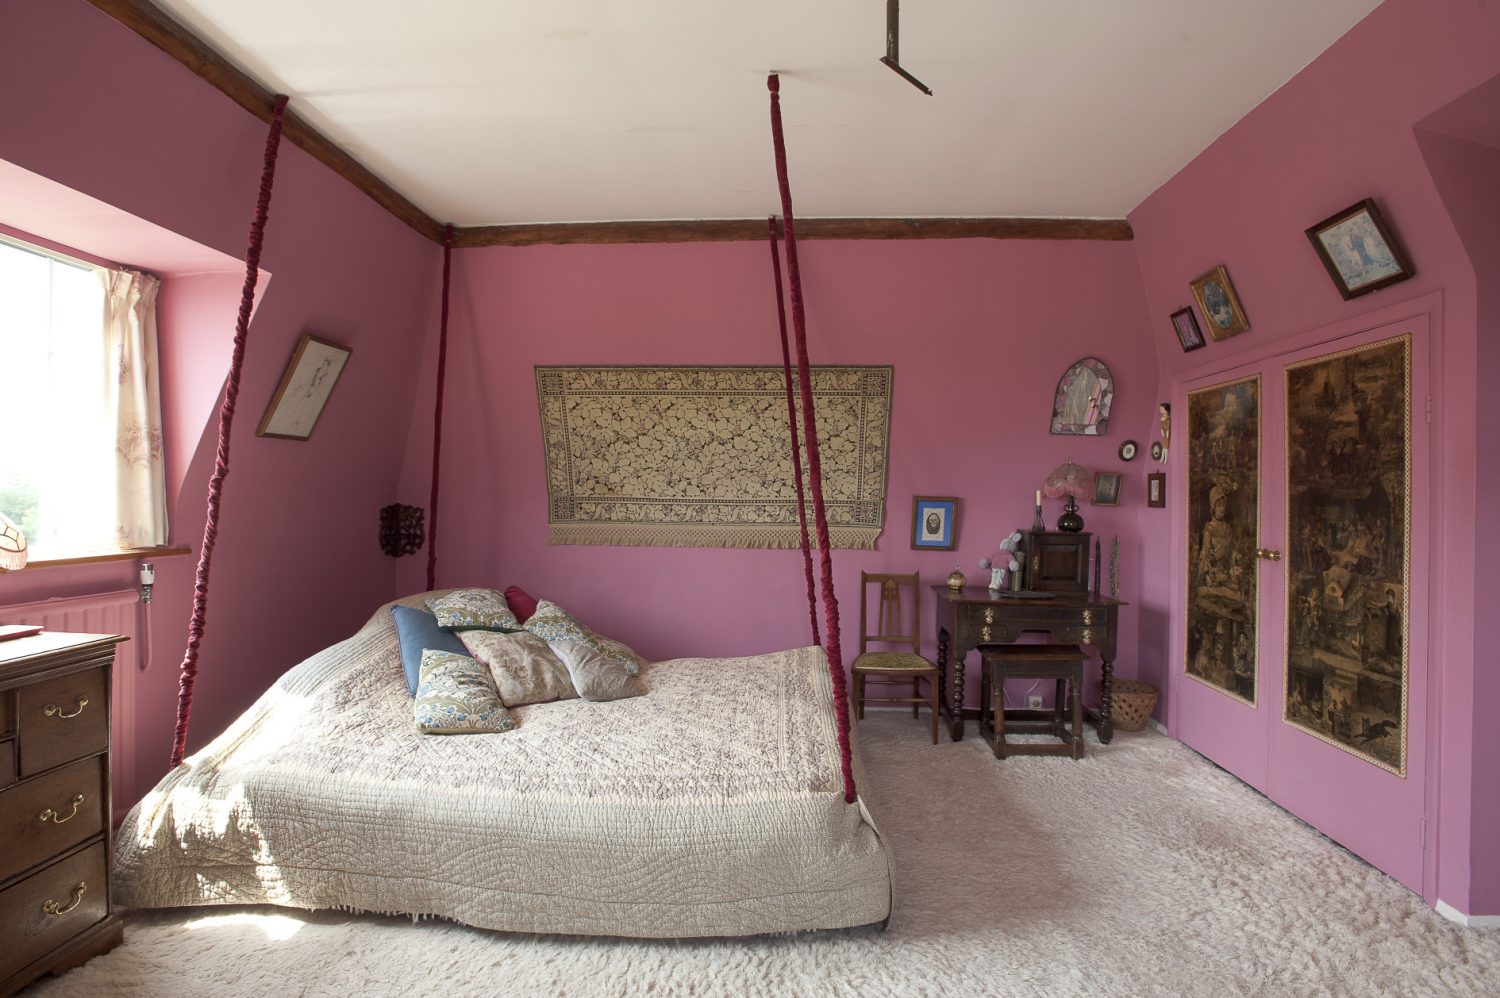 The master bedroom features a wonderful full-size double bed suspended from the ceiling